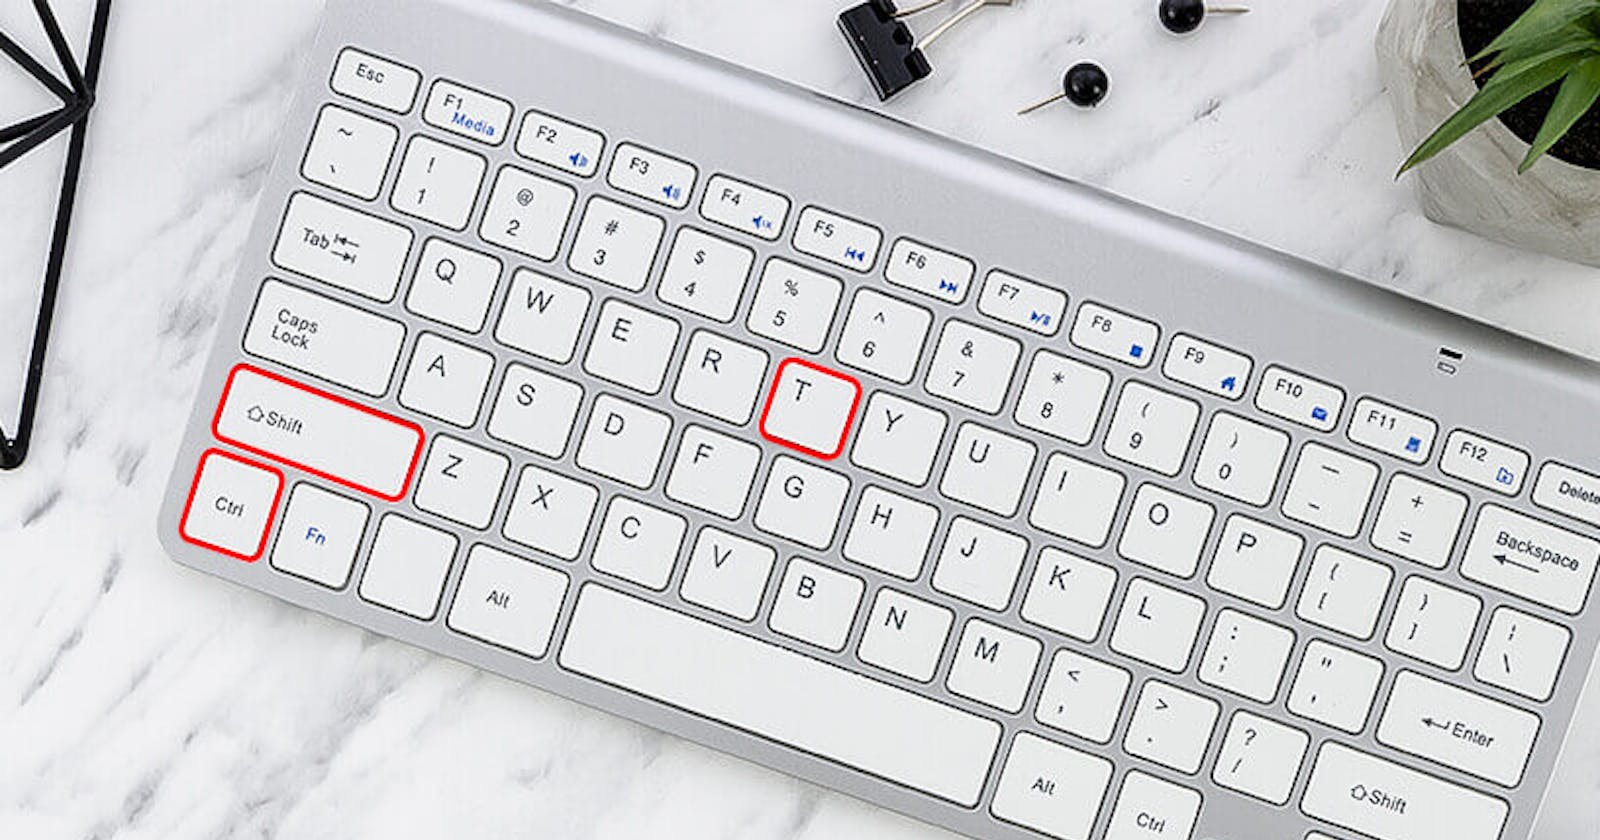 How to Keyboard Shortcut Tempted Use Ctrl+Z